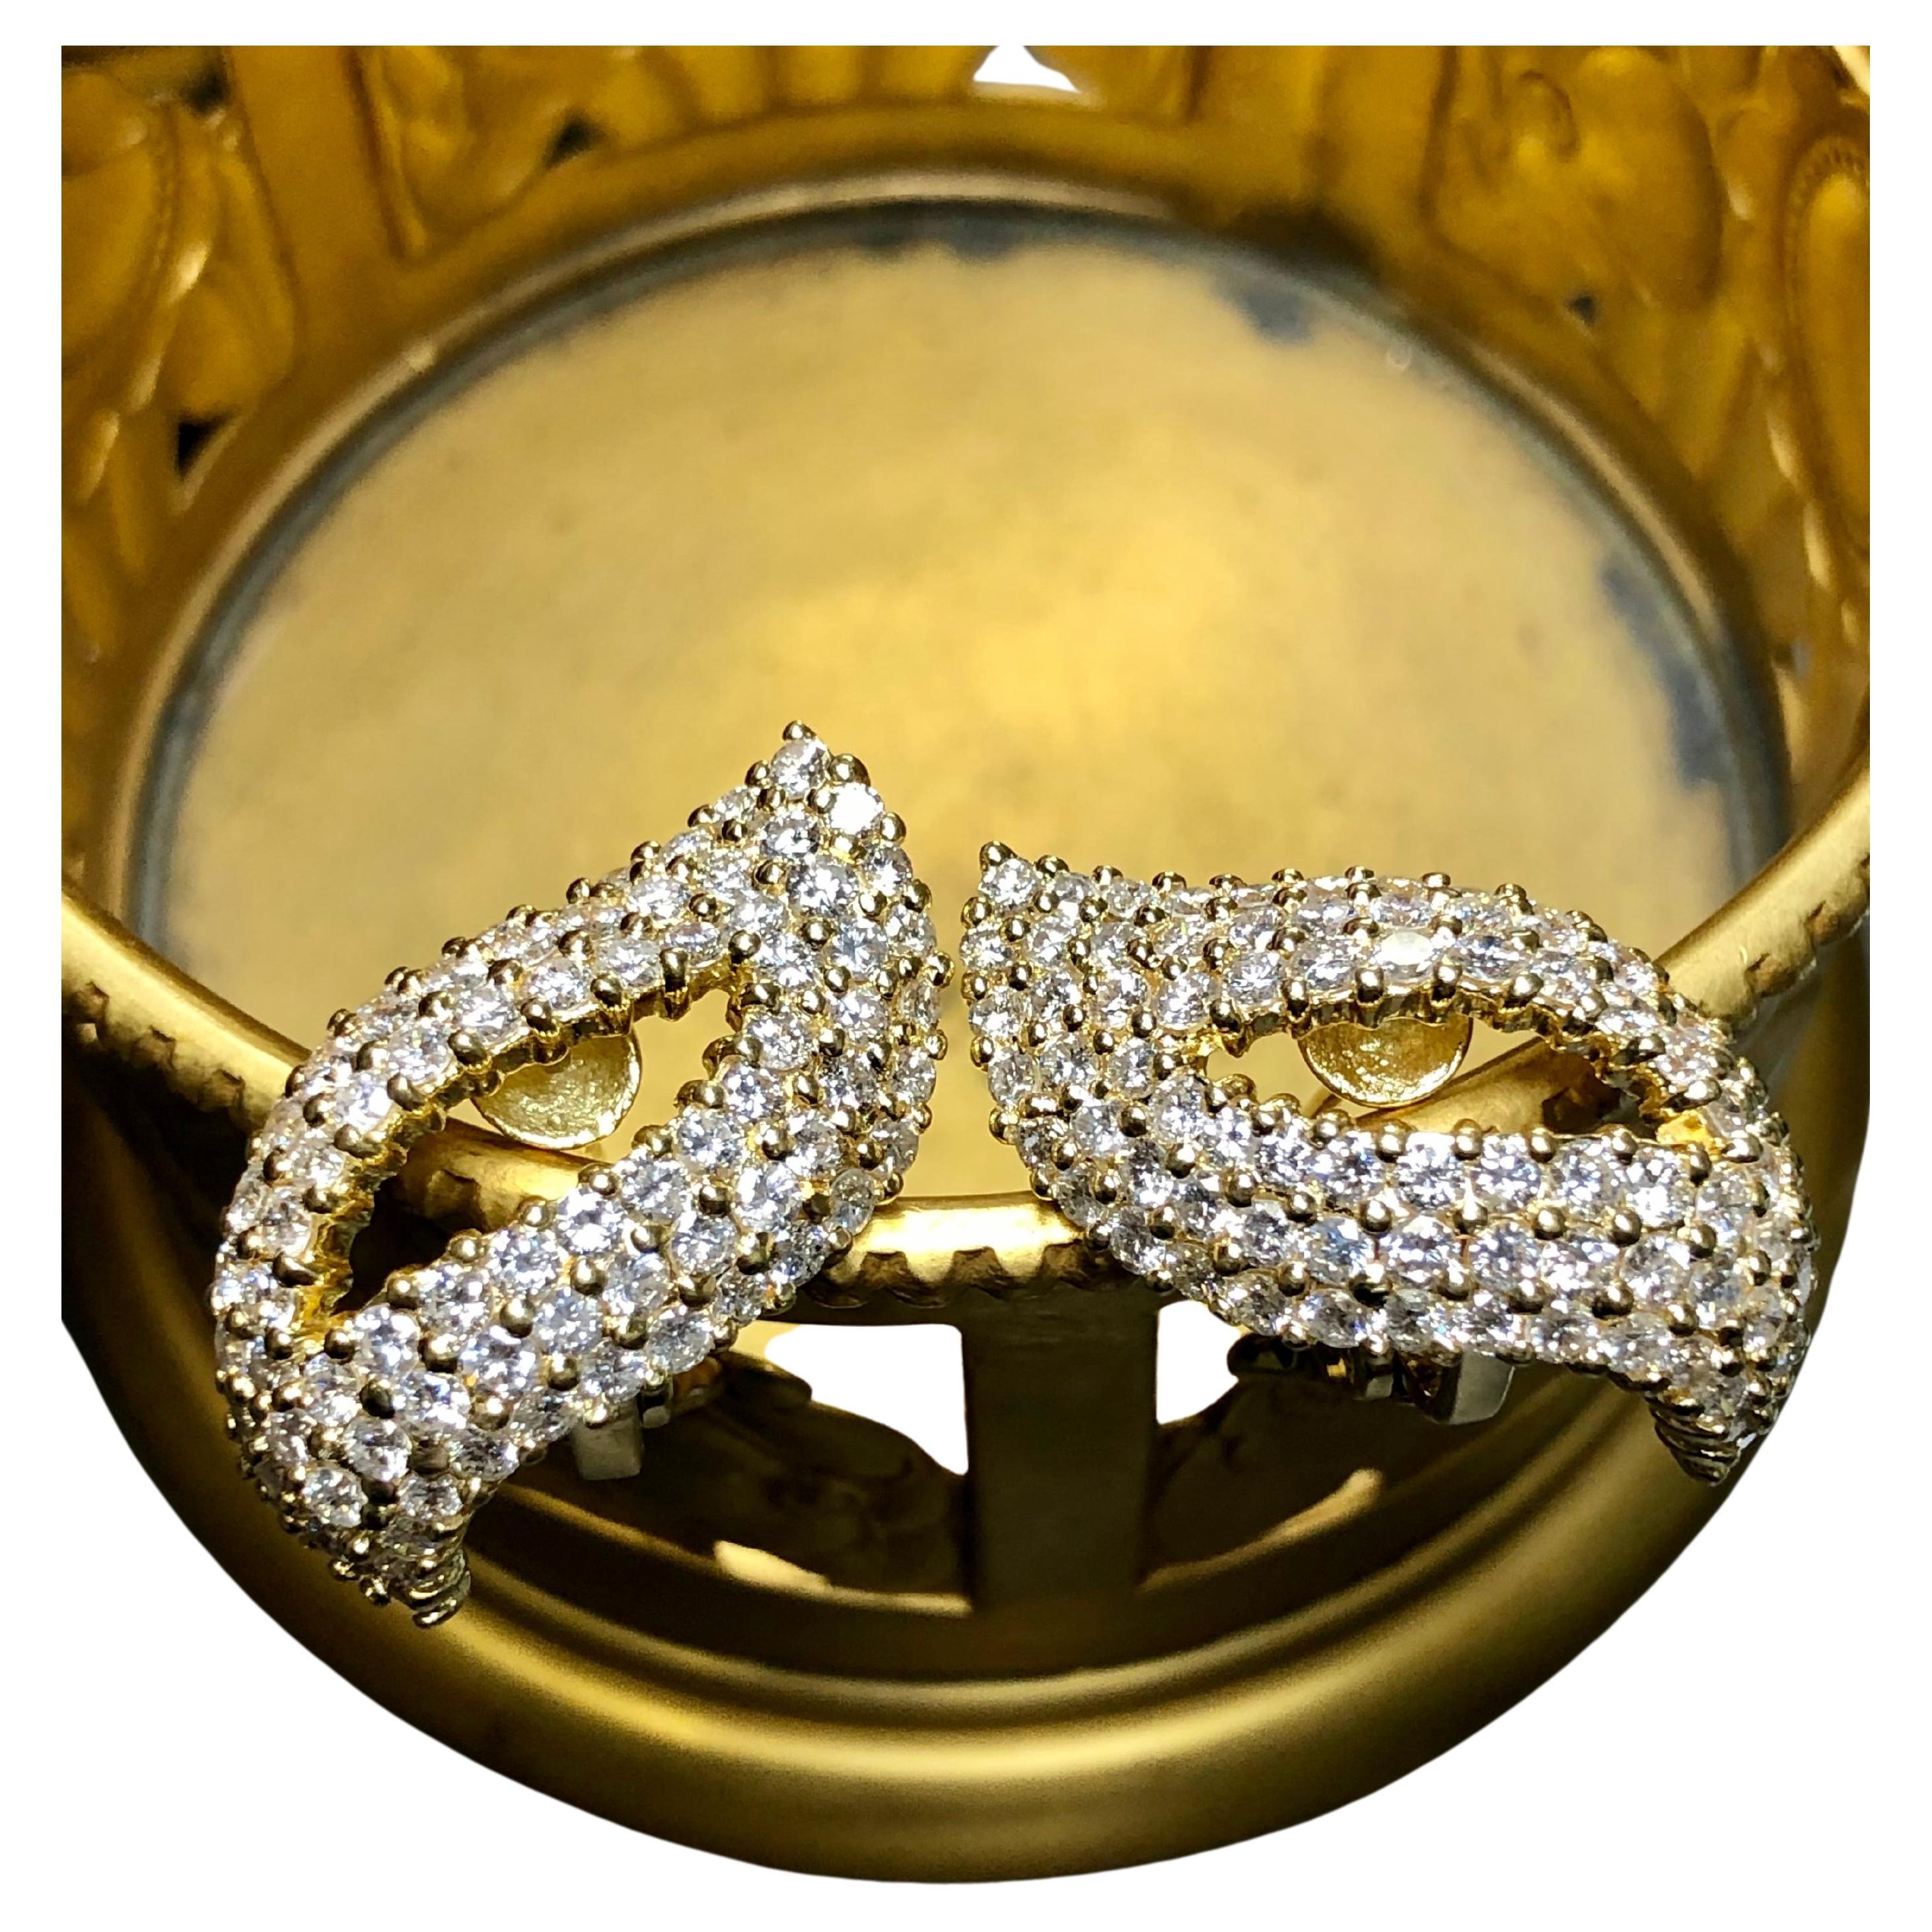 An elegant pair of huggie earrings crafted in 18K yellow gold and prong set with approximately 6.50cttw in G-H color Si1-2 clarity round diamonds. They are pierced with omega backs.


Dimensions/Weight:

Earrings measure 1.1” long by .60” wide and